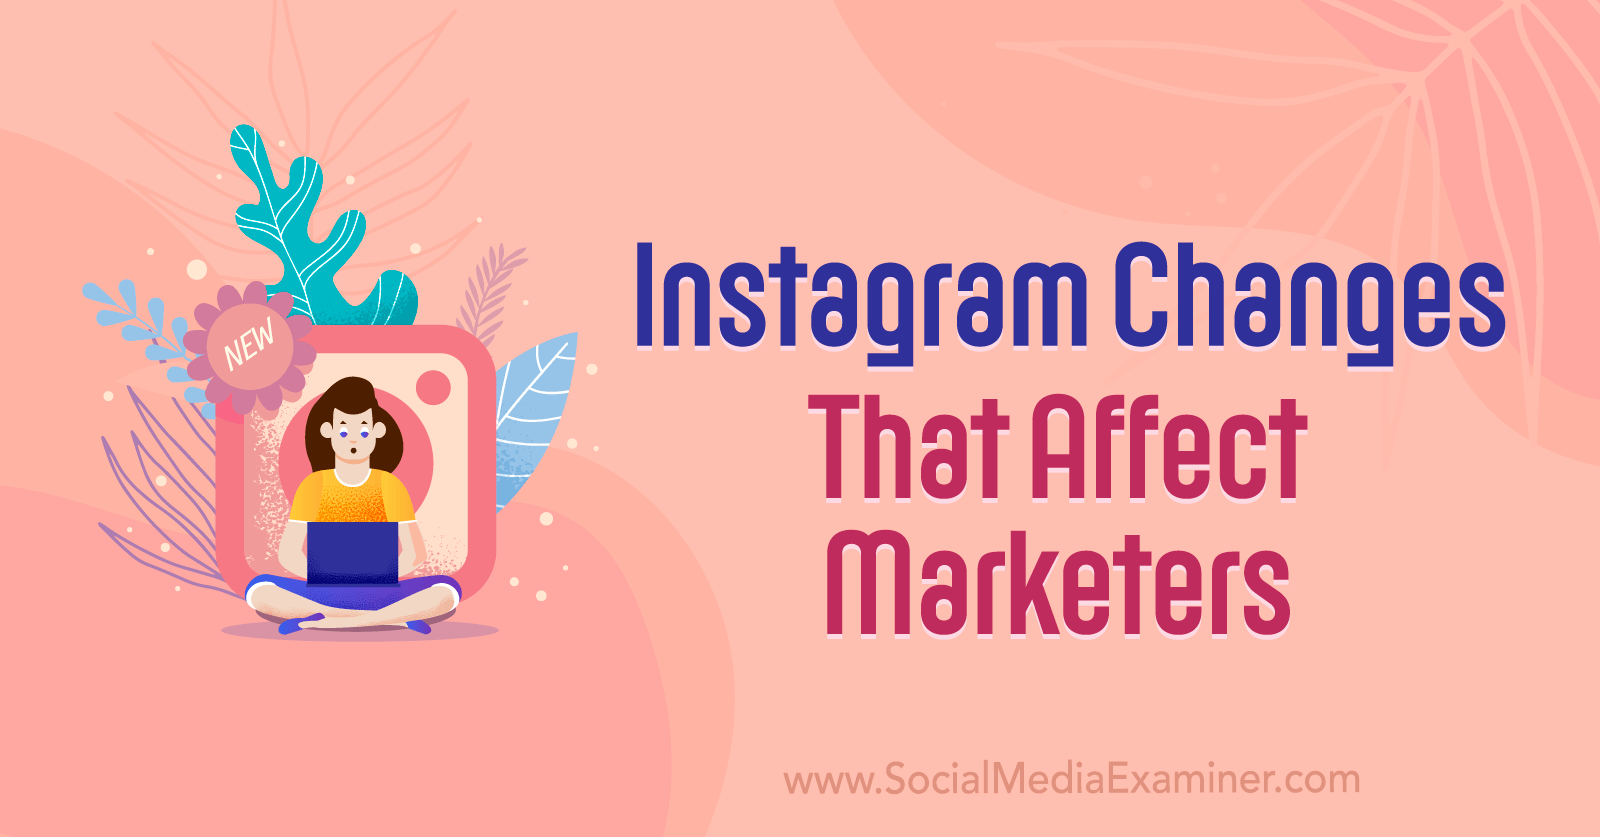 Instagram Changes That Affect Marketers by Social Media Examiner